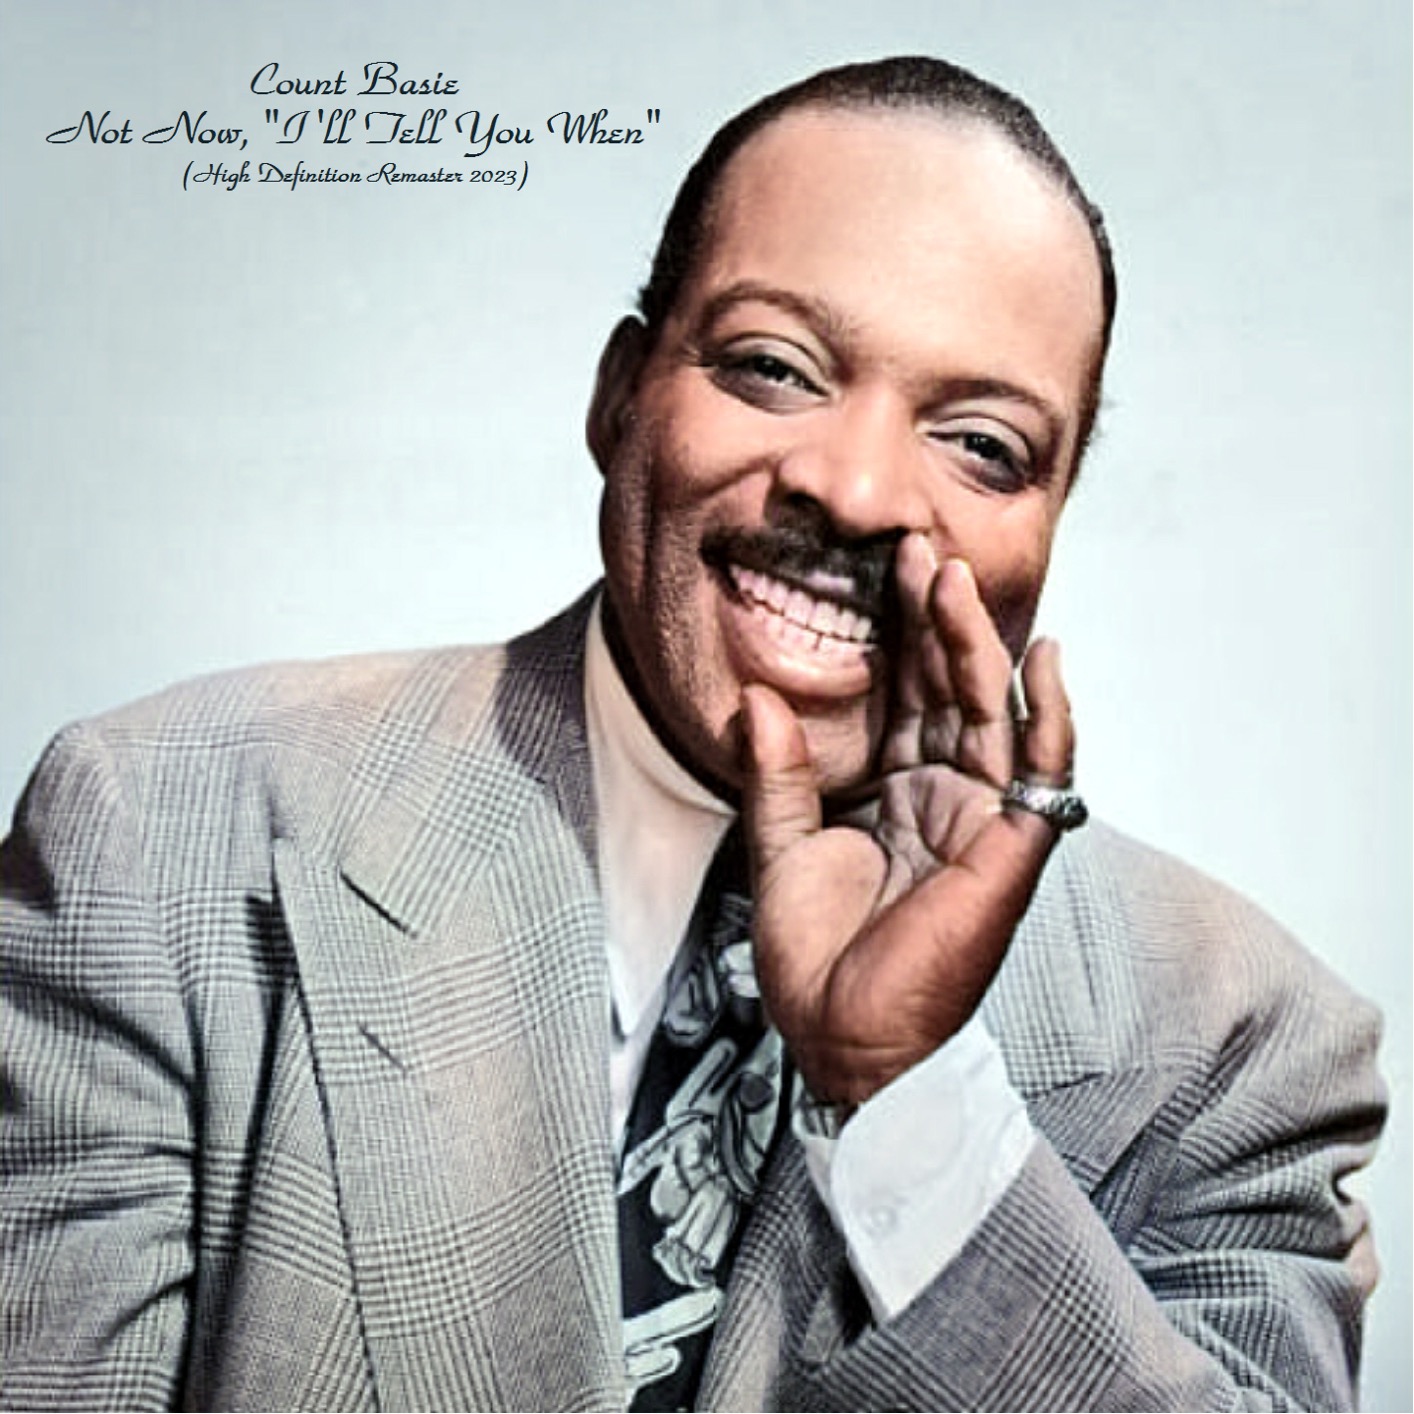 Count Basie – Not Now, “I’ll Tell You When” (High Definition Remaster) (1960/2023) [FLAC 24bit/44,1kHz]